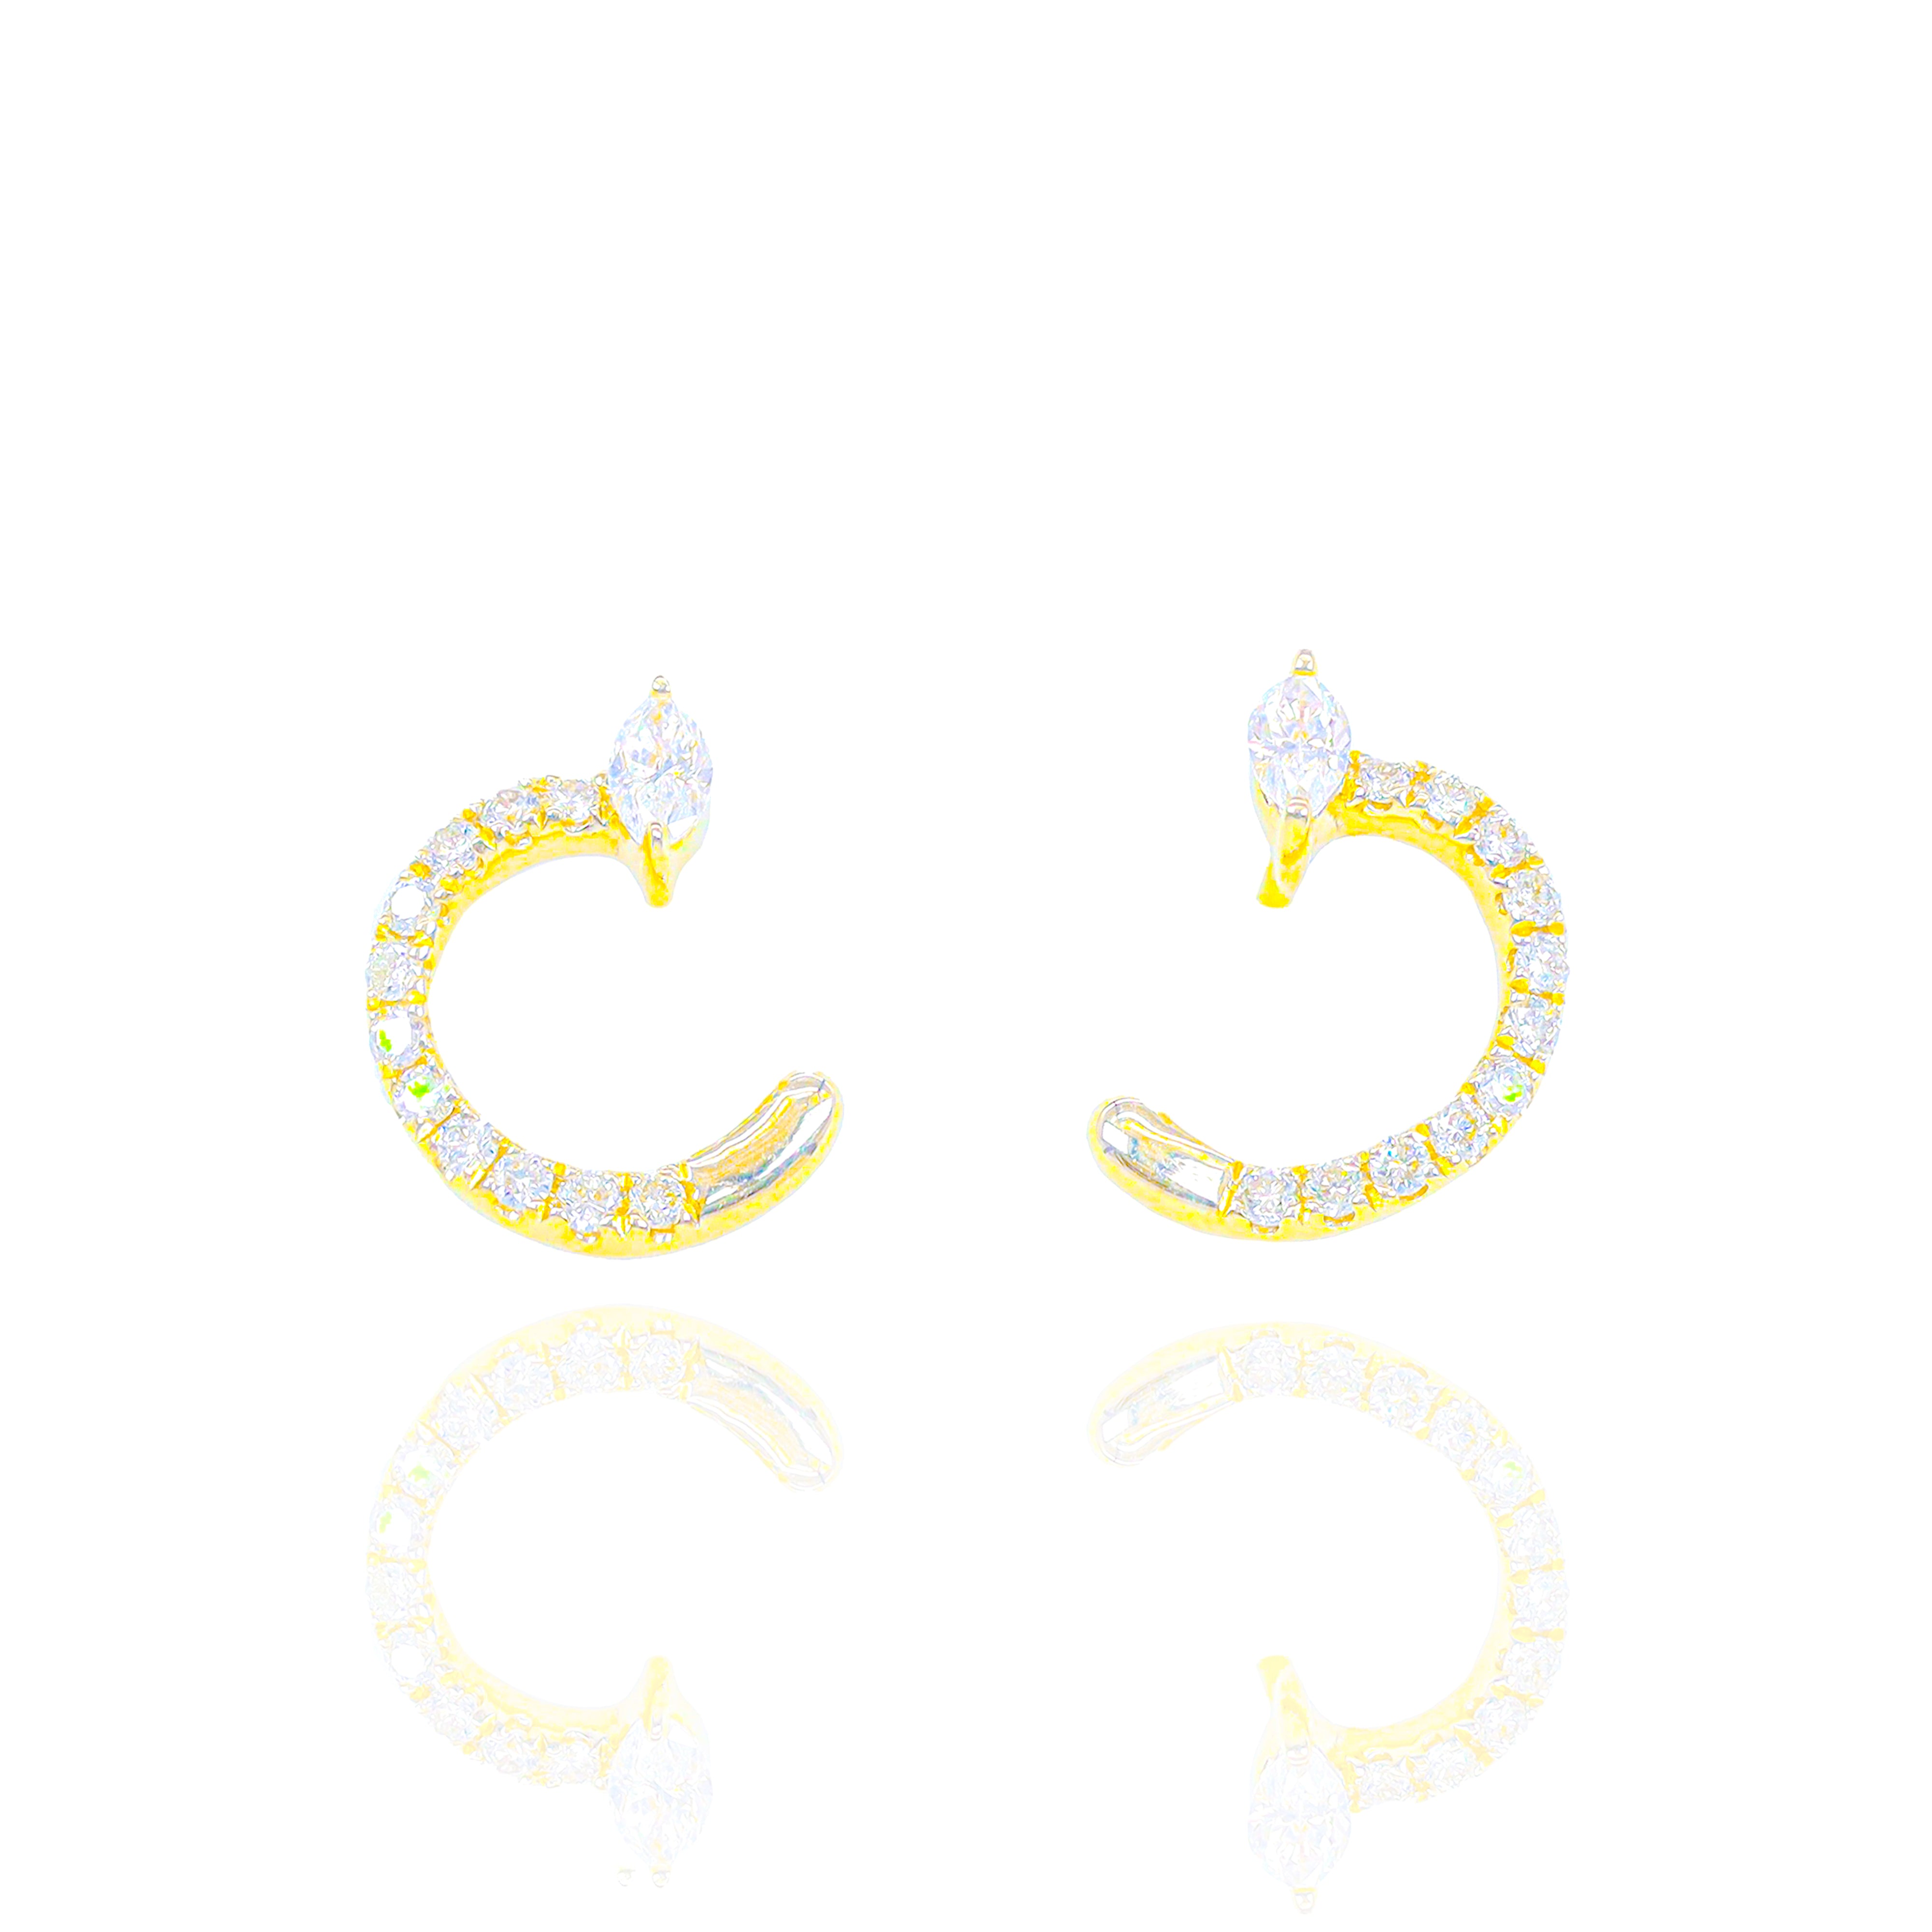 Half Circle Marquis and Round Diamond Earrings